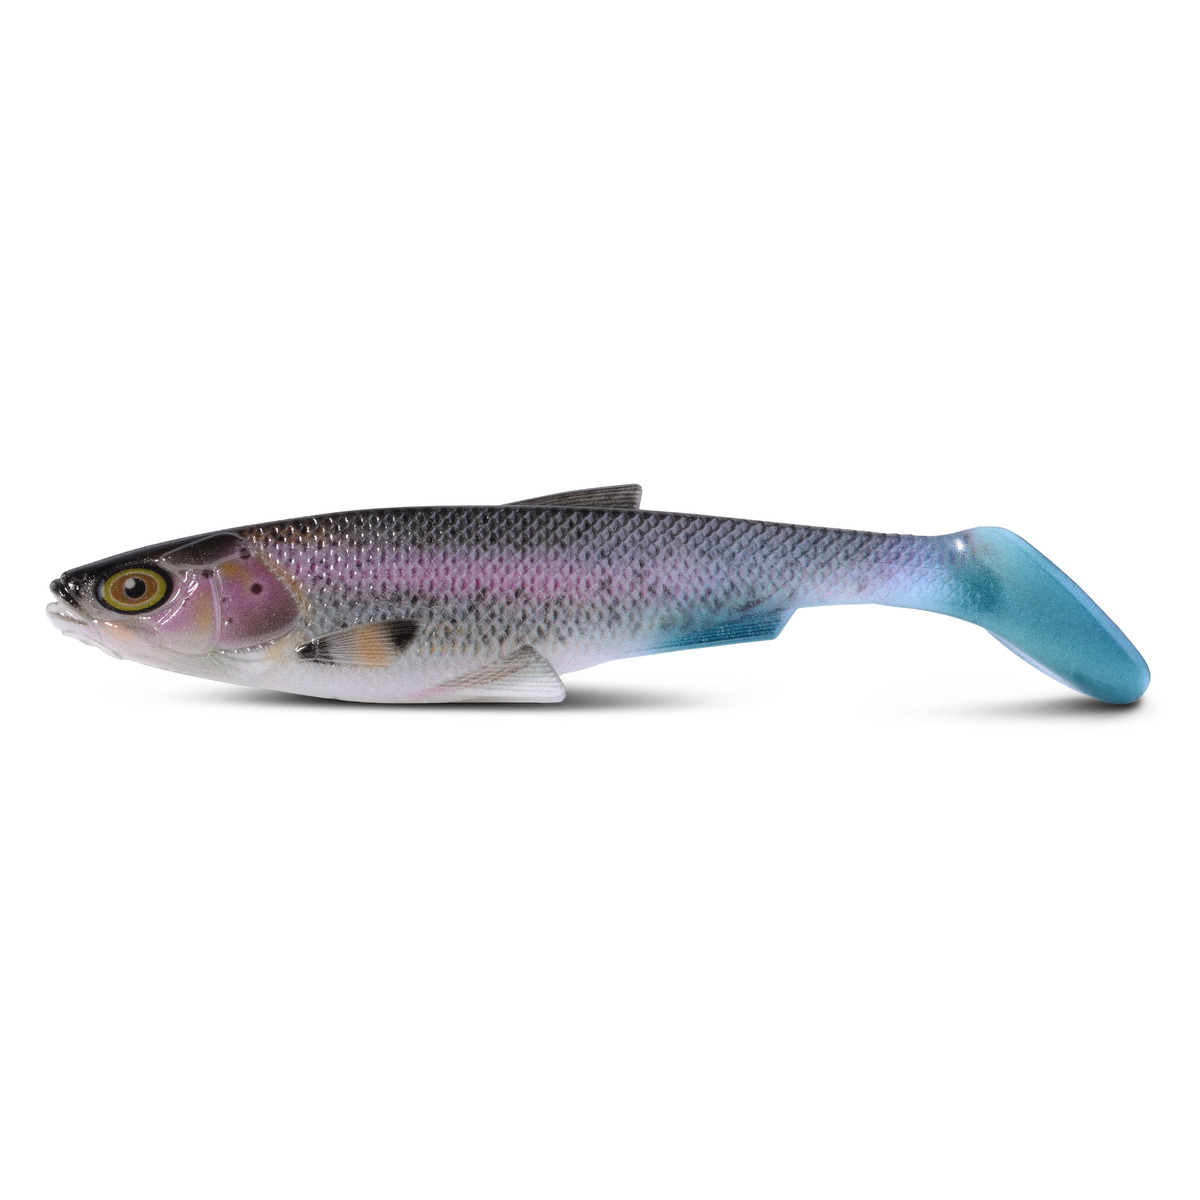 Iron Claw Belly Boy Ng Nature 21 Cm - Trucha arco iris